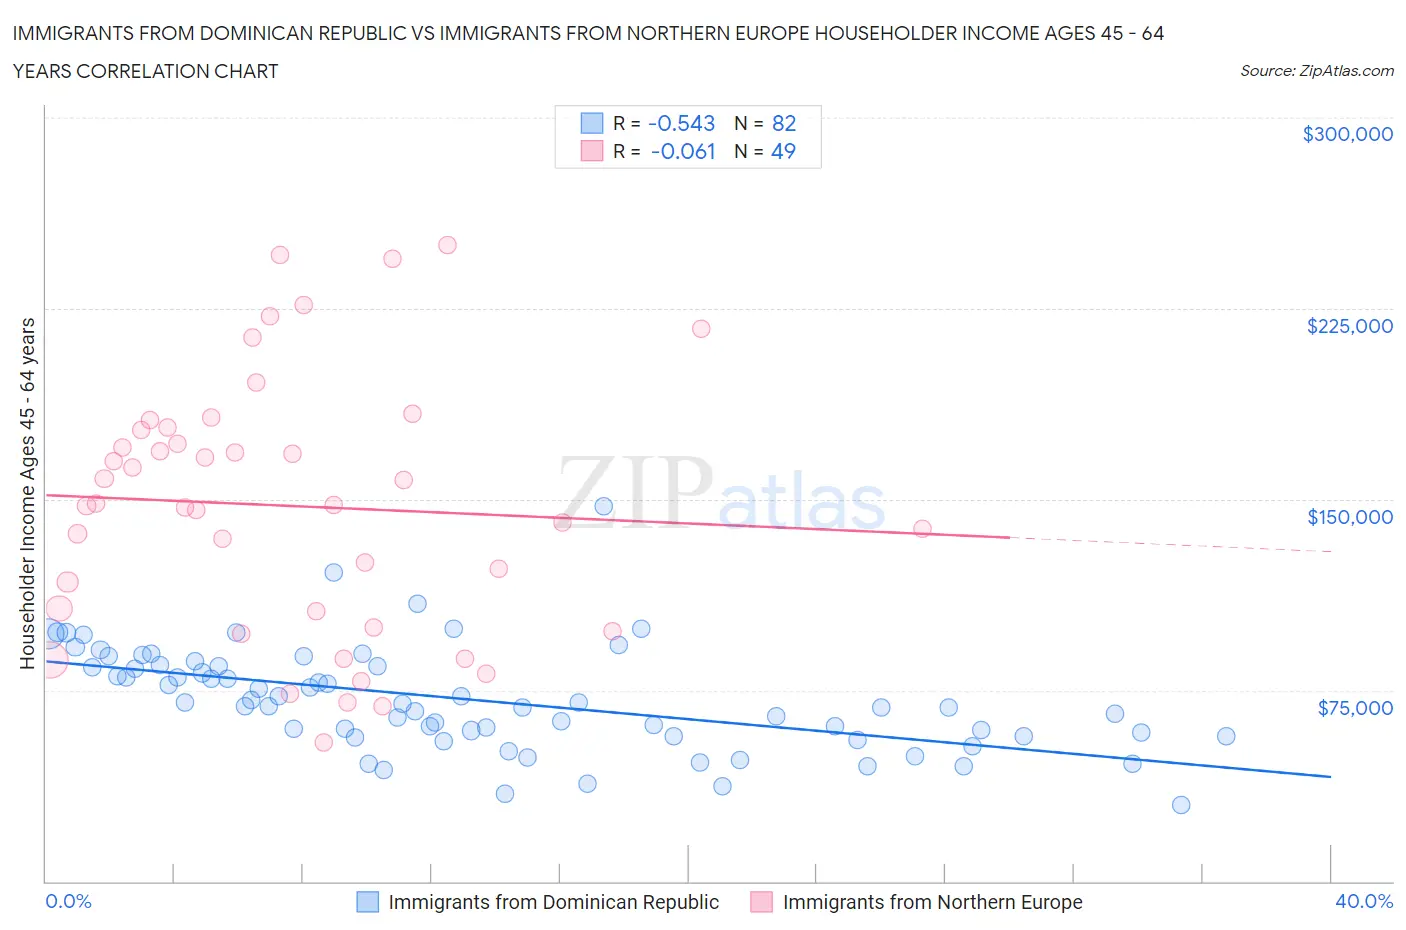 Immigrants from Dominican Republic vs Immigrants from Northern Europe Householder Income Ages 45 - 64 years